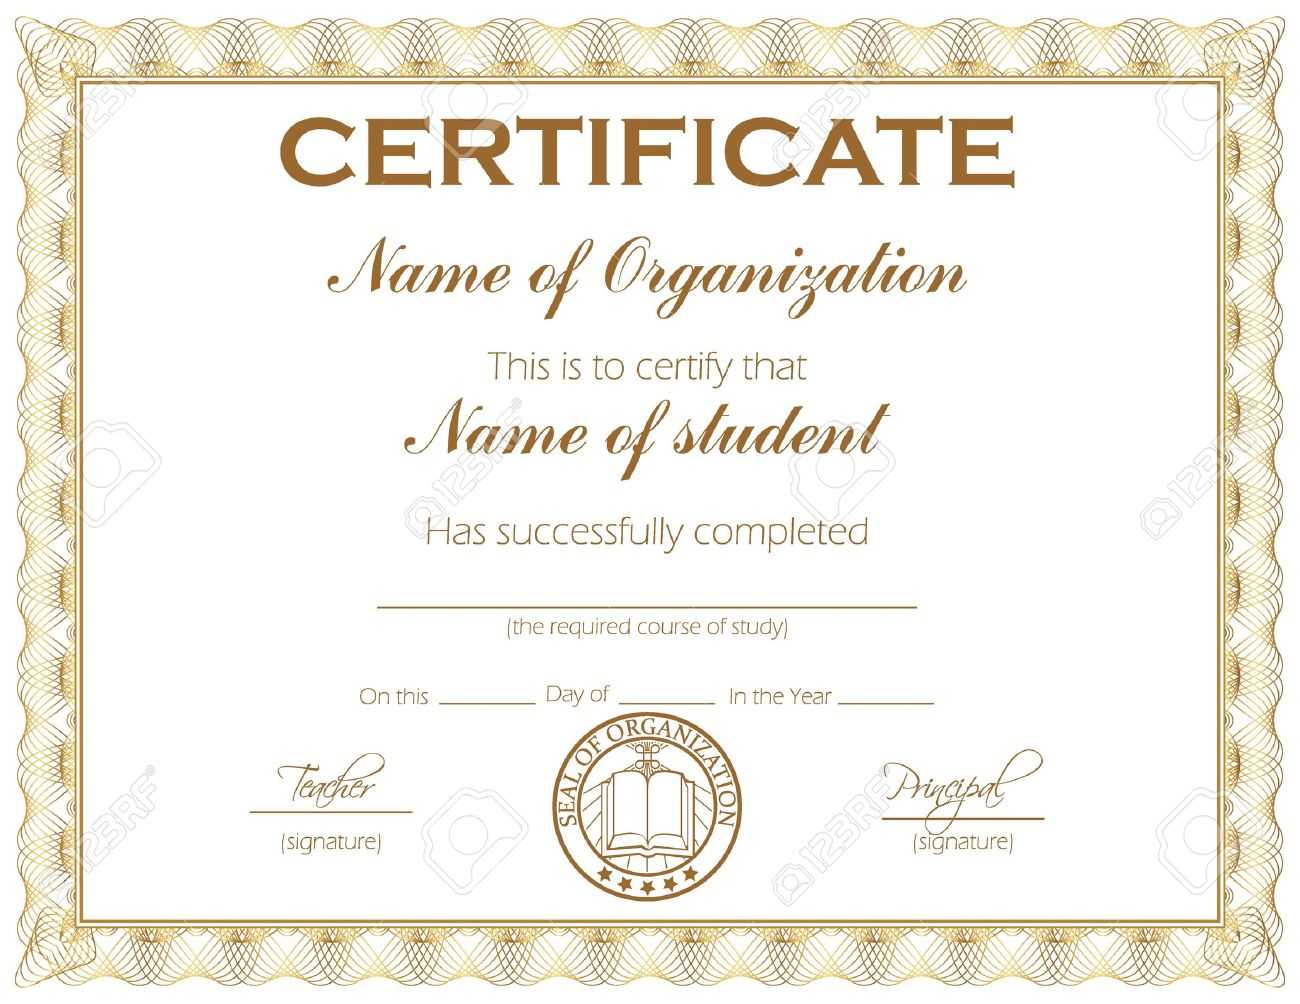 General Purpose Certificate Or Award With Sample Text That Can.. For Template For Certificate Of Award